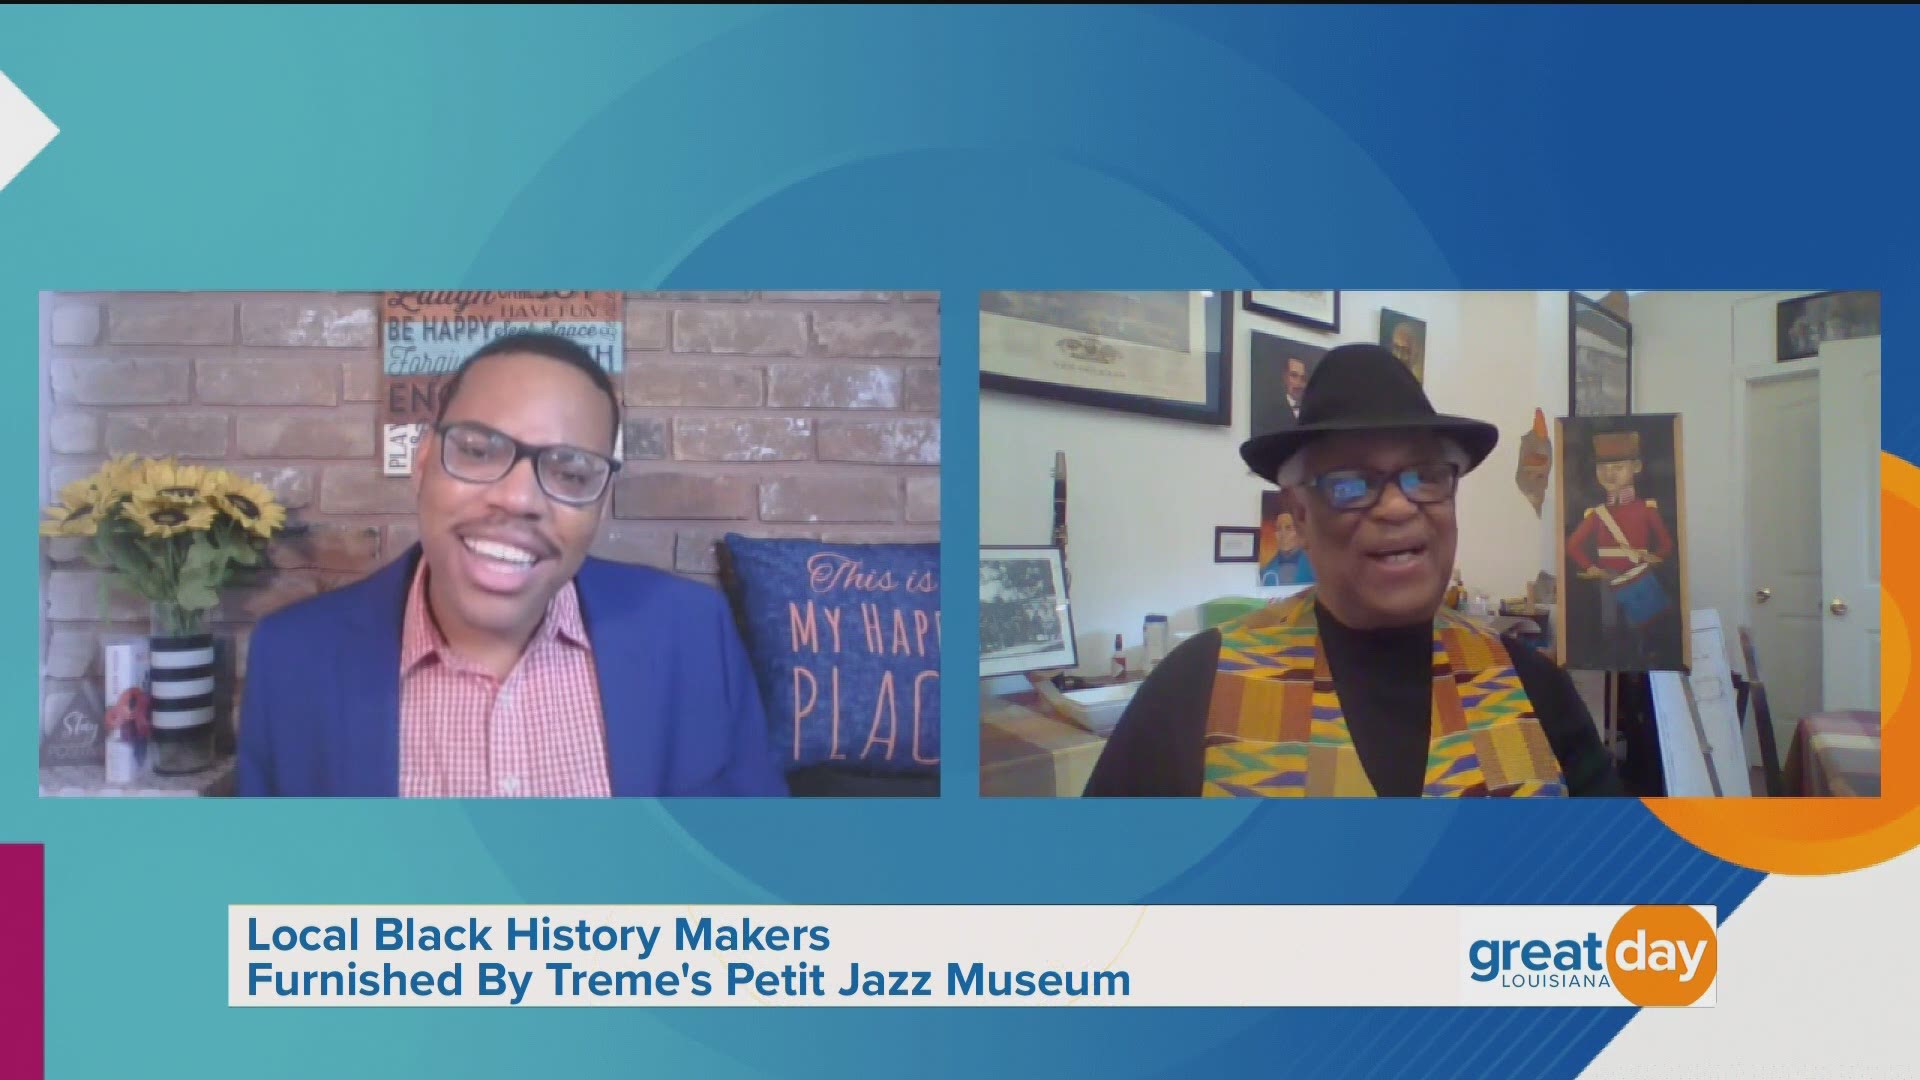 Treme's Petite Jazz Museum founder, Al Jackson, discussed local black history makers who have made an impact on the court system.